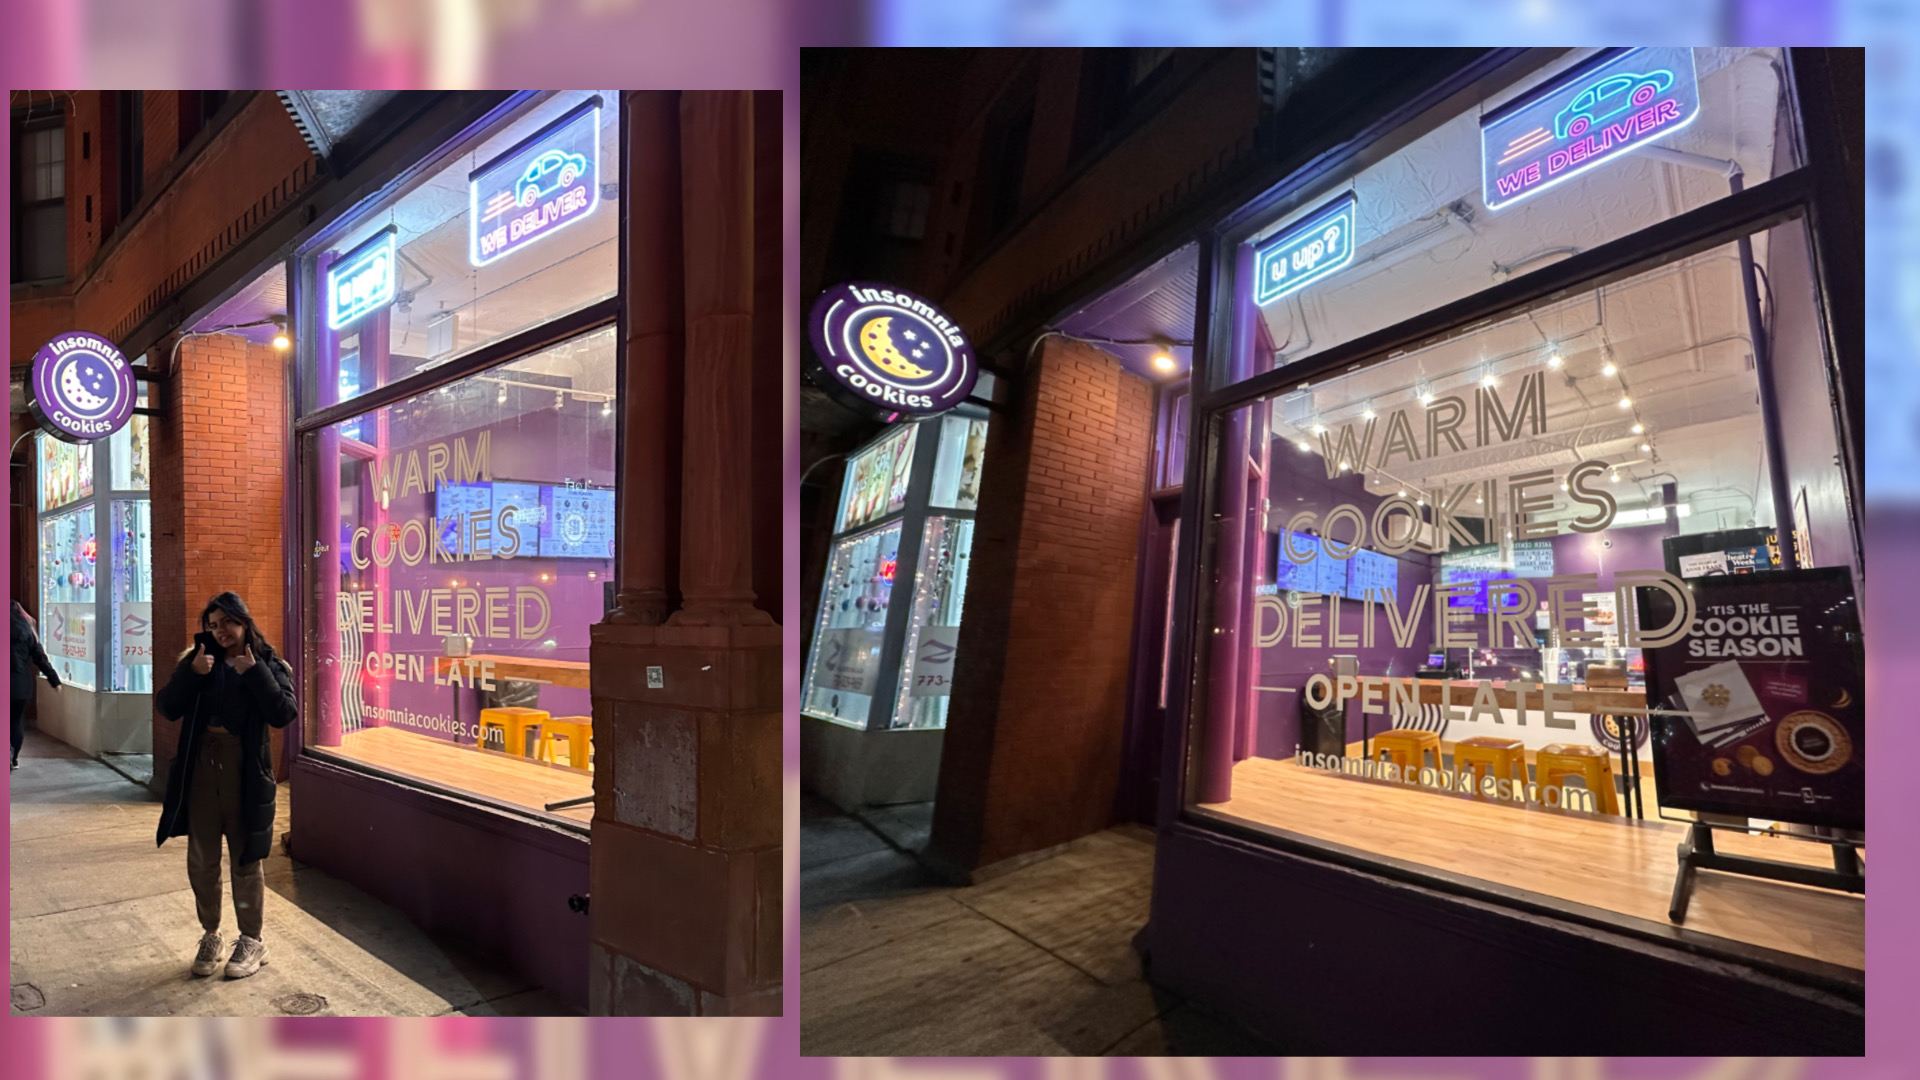 Two images of a cookie store.